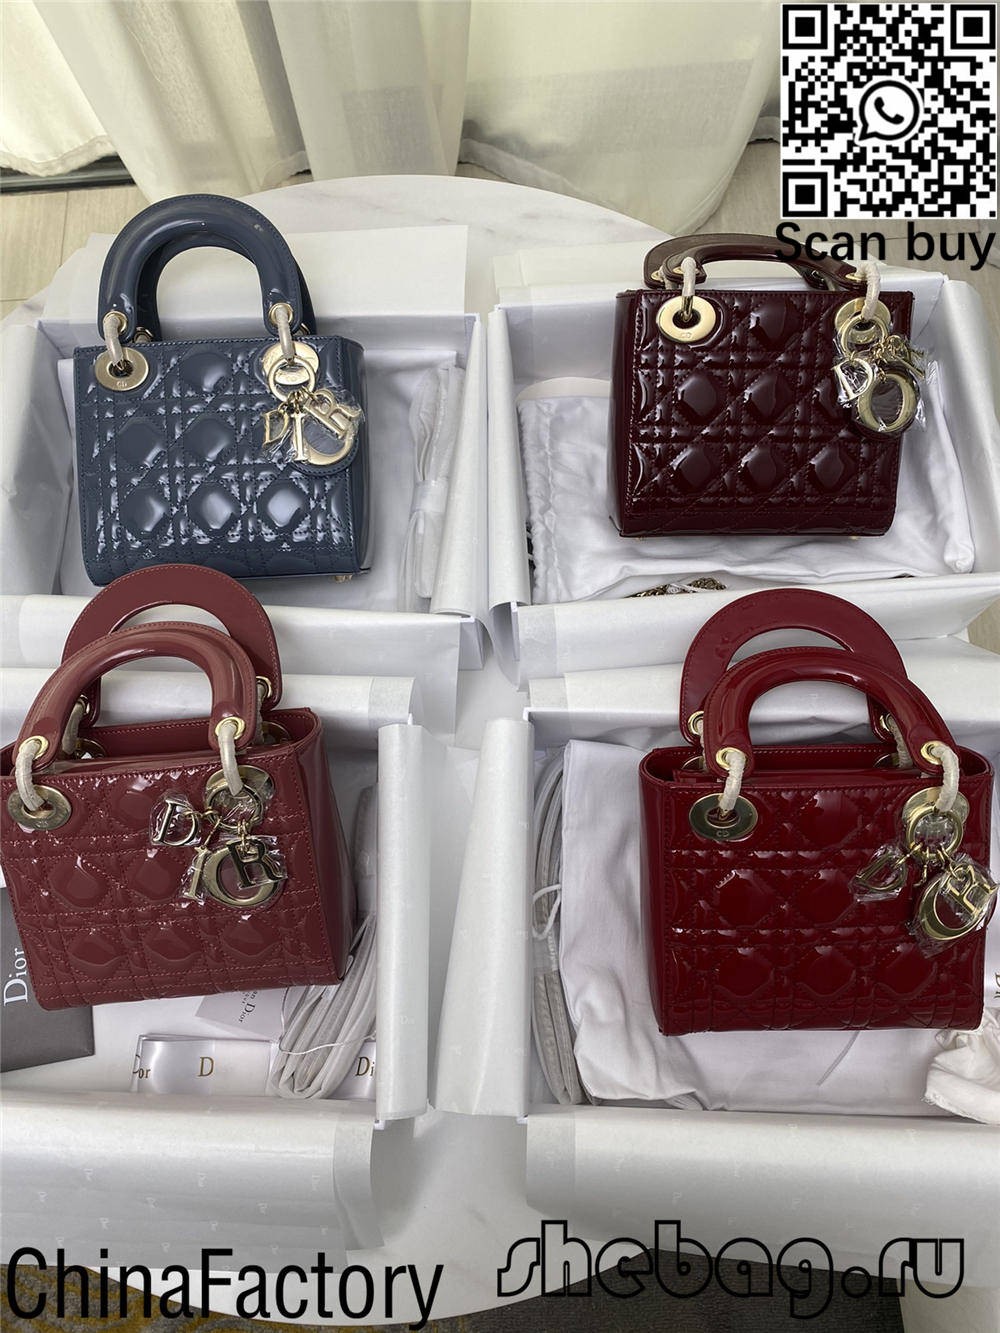 12 tips to teach you How to buy replica designer bags (2022 updated)-Best Quality Fake Louis Vuitton Bag Online Store, Replica designer bag ru